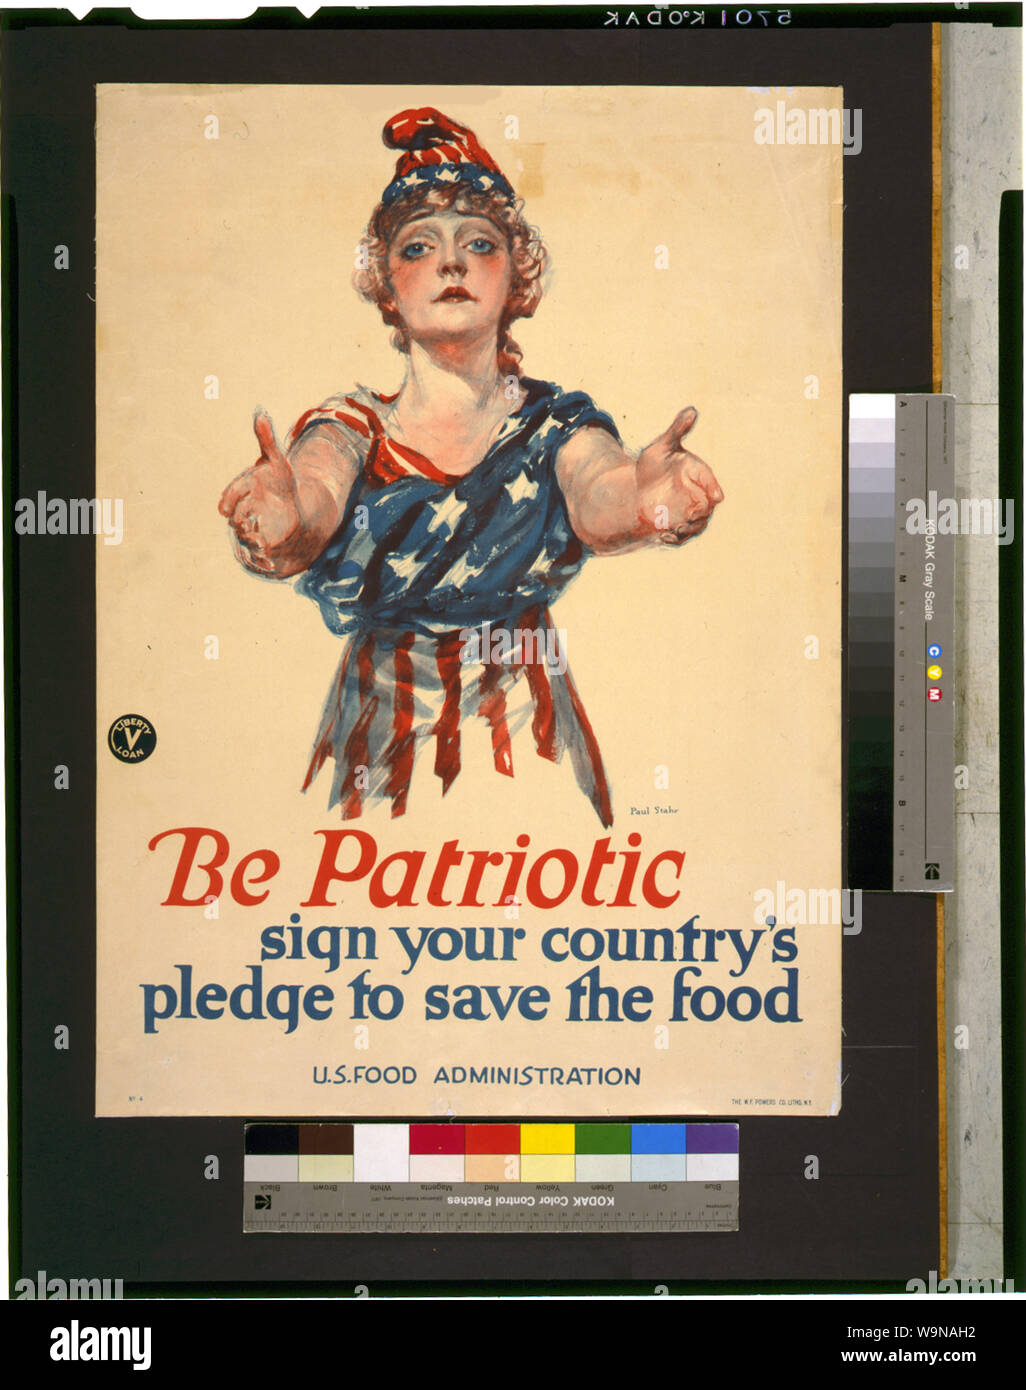 Be patriotic--sign your country's pledge to save the food / Paul Stahr. Stock Photo